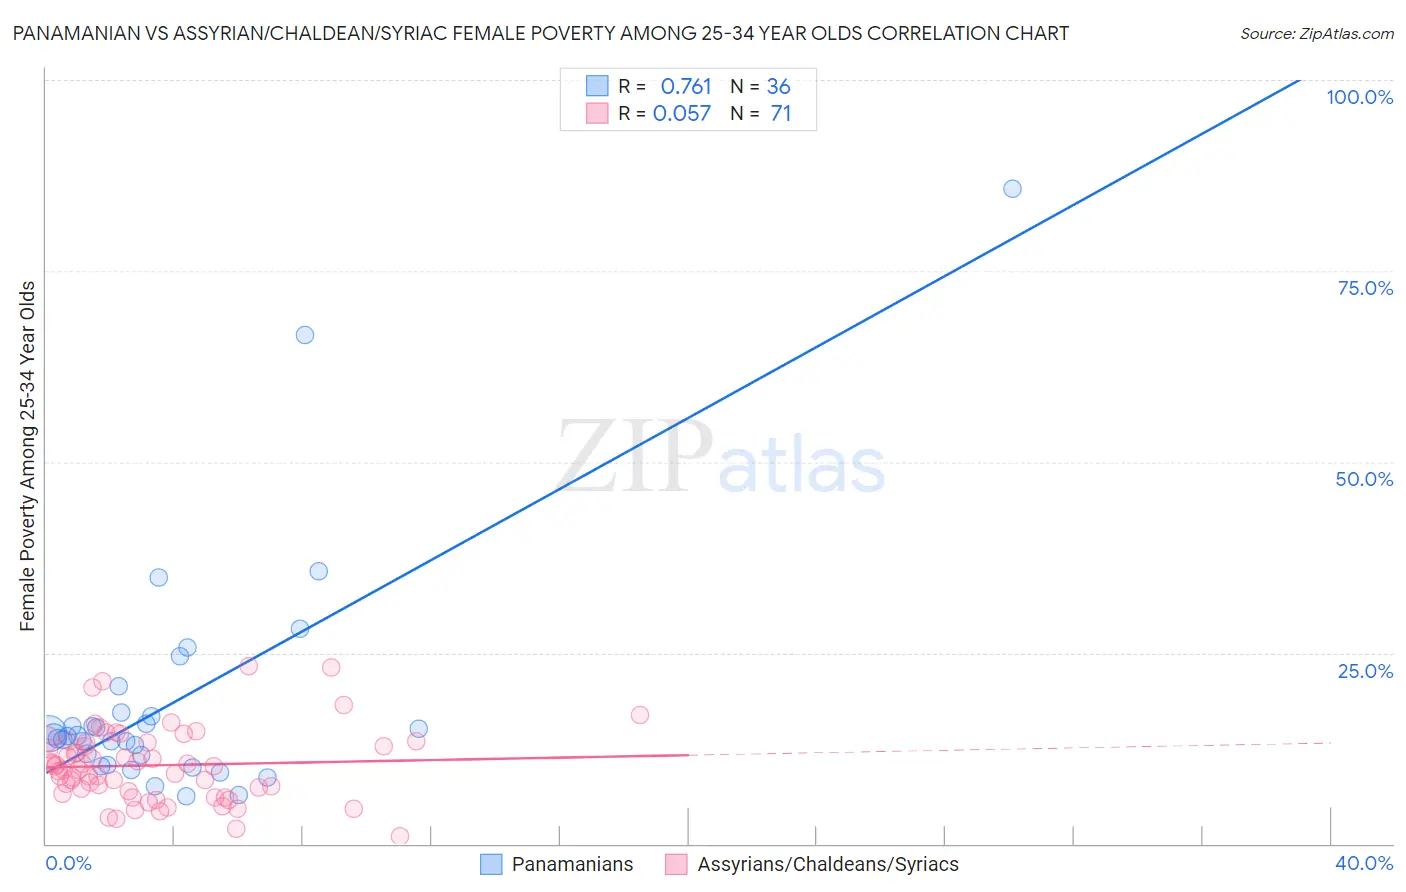 Panamanian vs Assyrian/Chaldean/Syriac Female Poverty Among 25-34 Year Olds